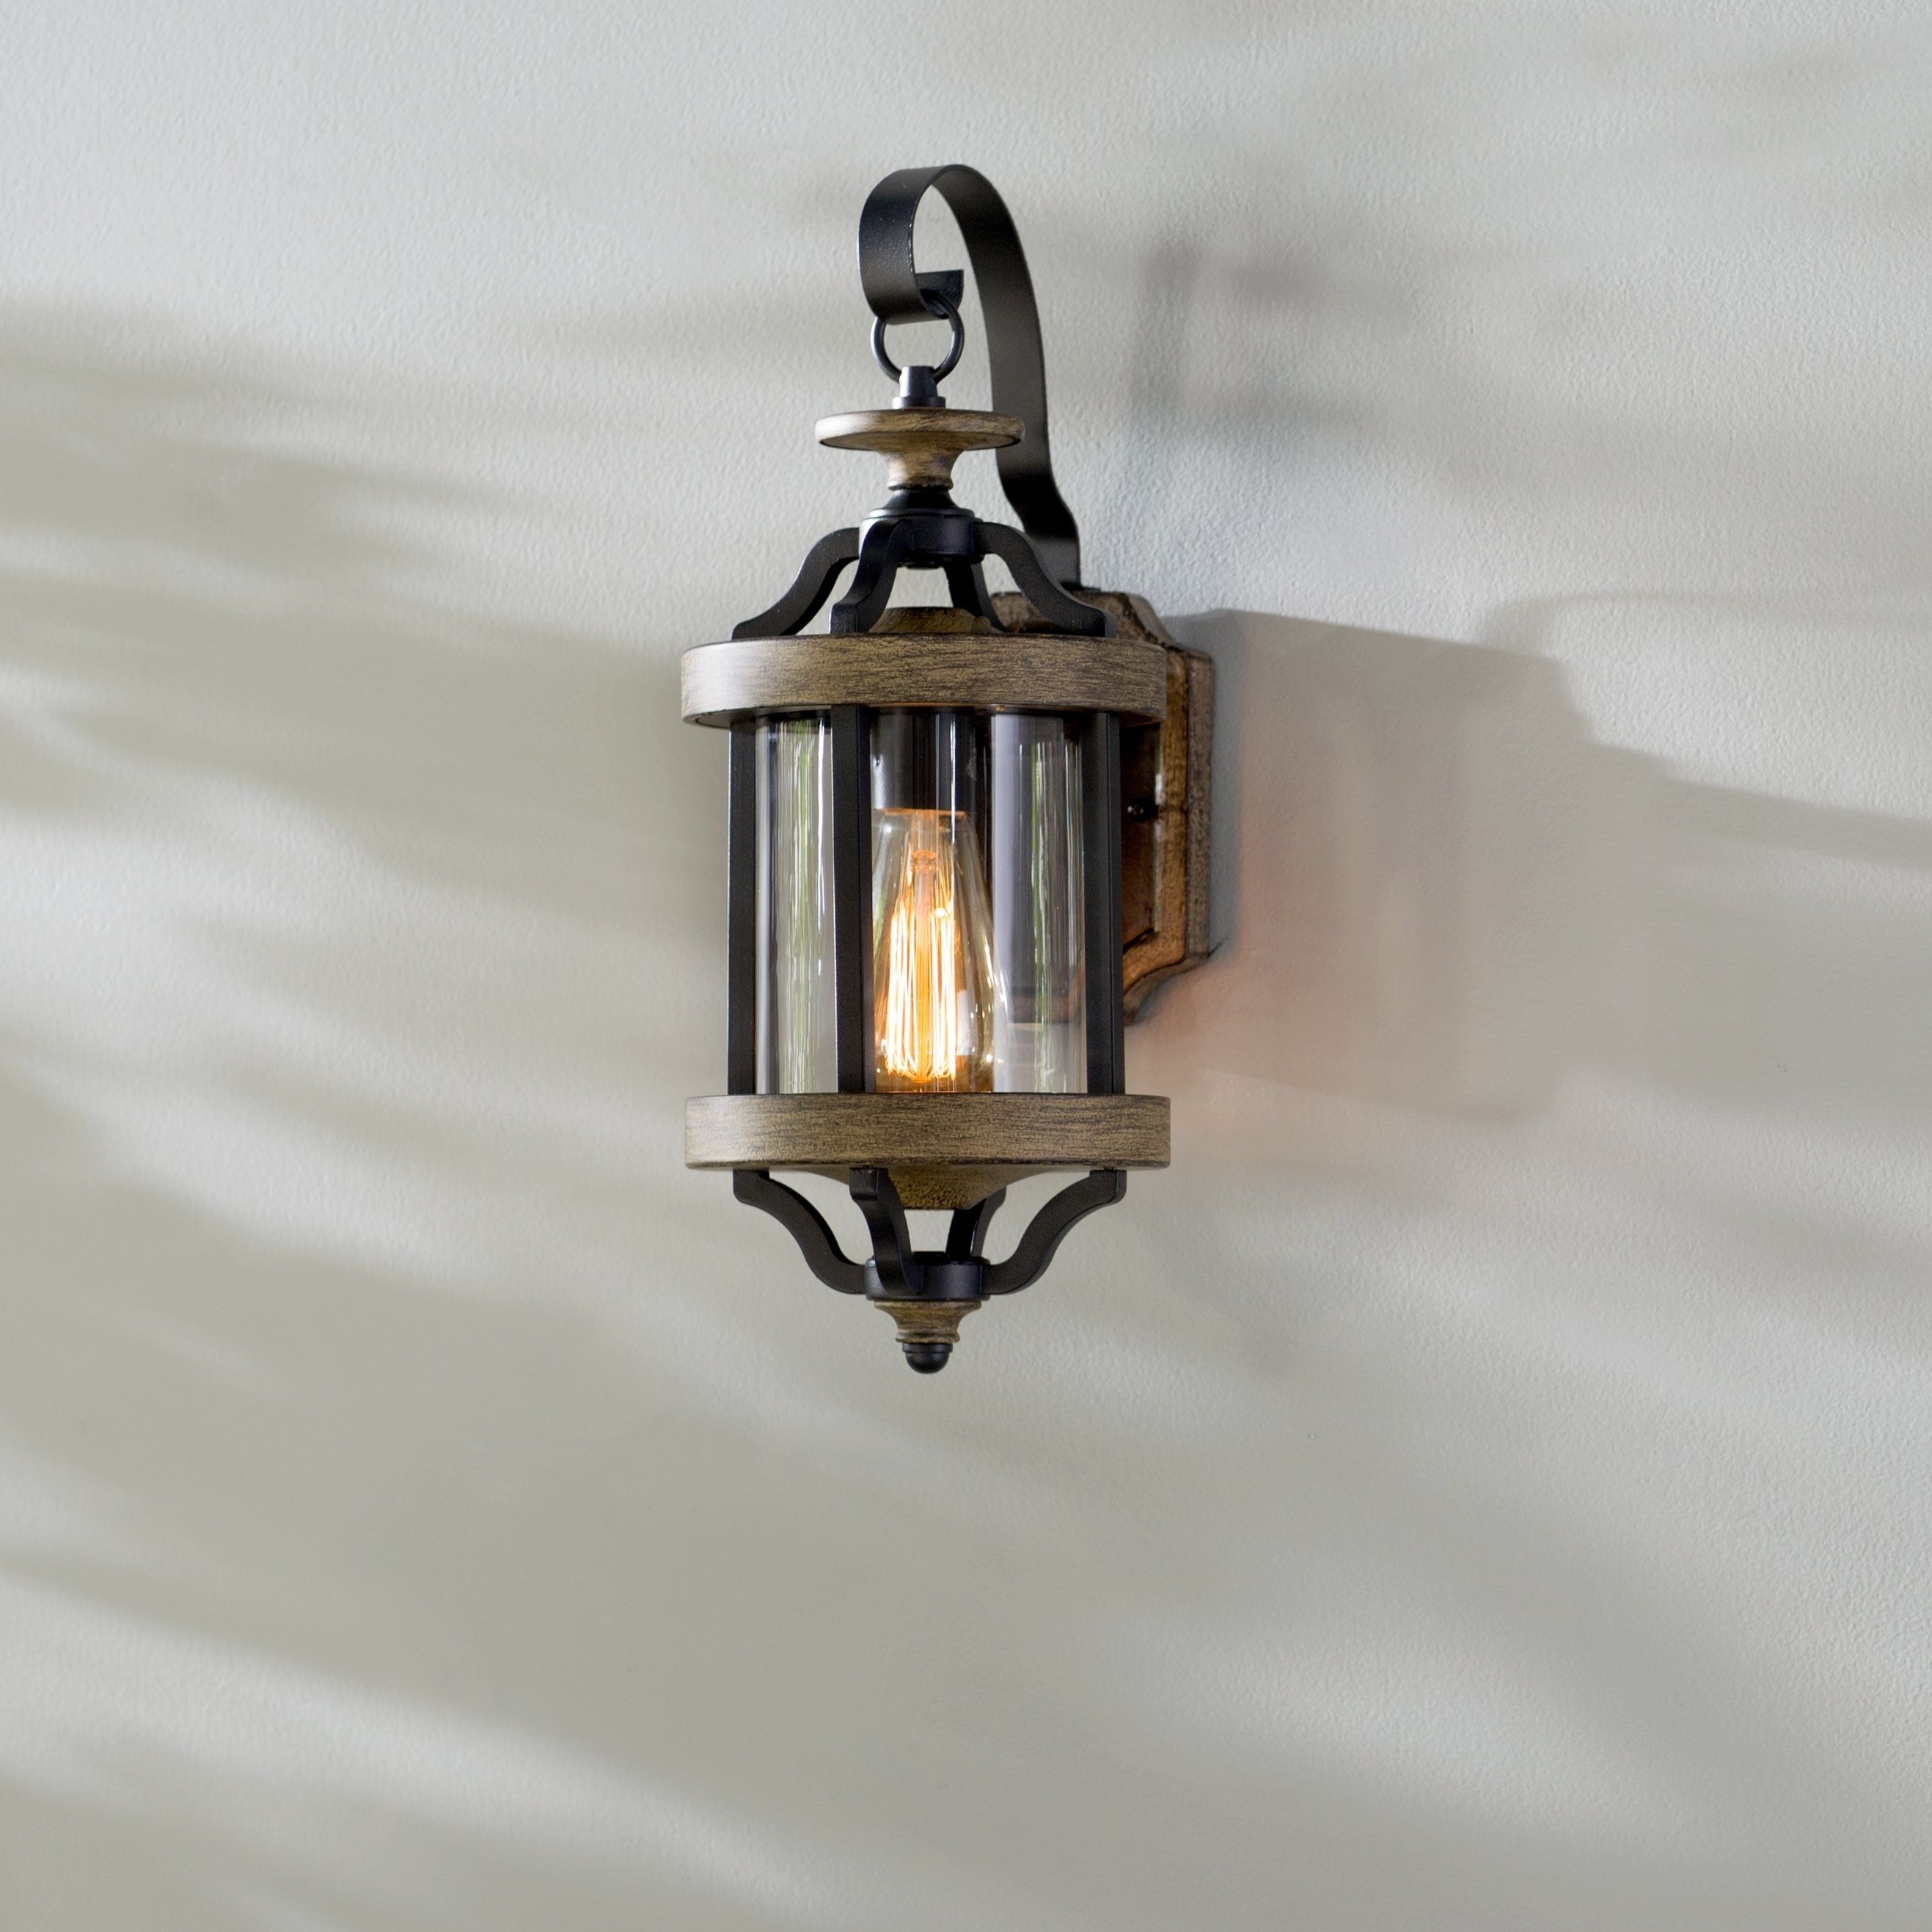 Laurel Foundry Modern Farmhouse Elisabetta 1 Light Outdoor Wall Intended For Joanns Outdoor Lanterns (View 17 of 20)